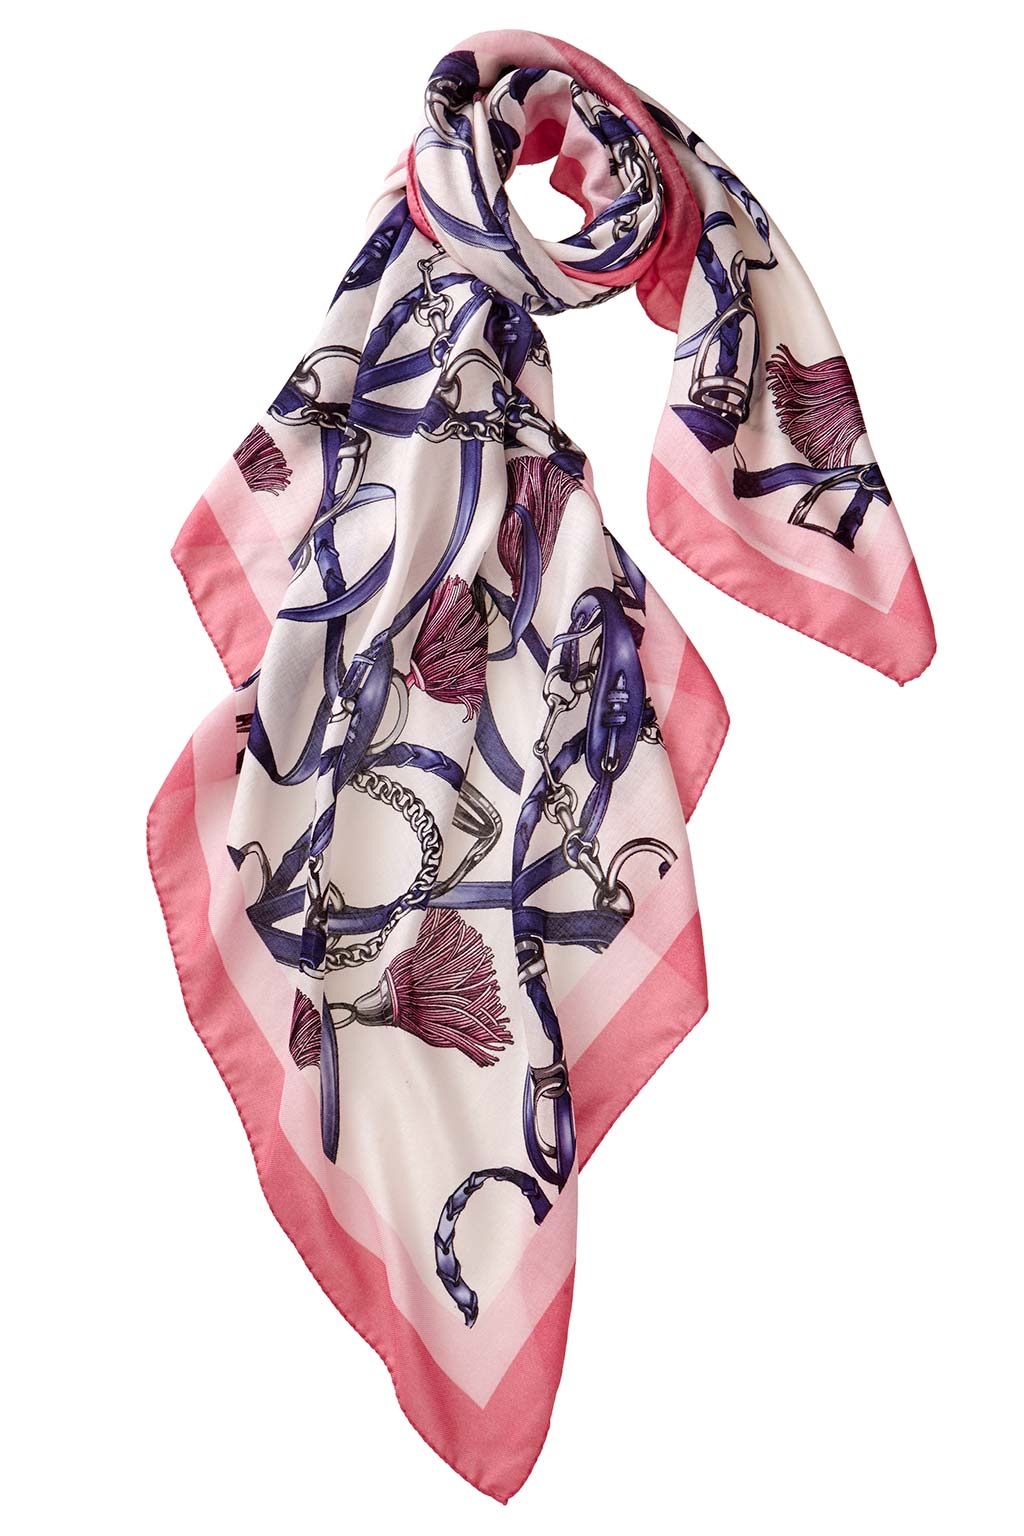 Alpine Cashmere's Made in Italy Grande Firenze Square Scarf in Rose Pink